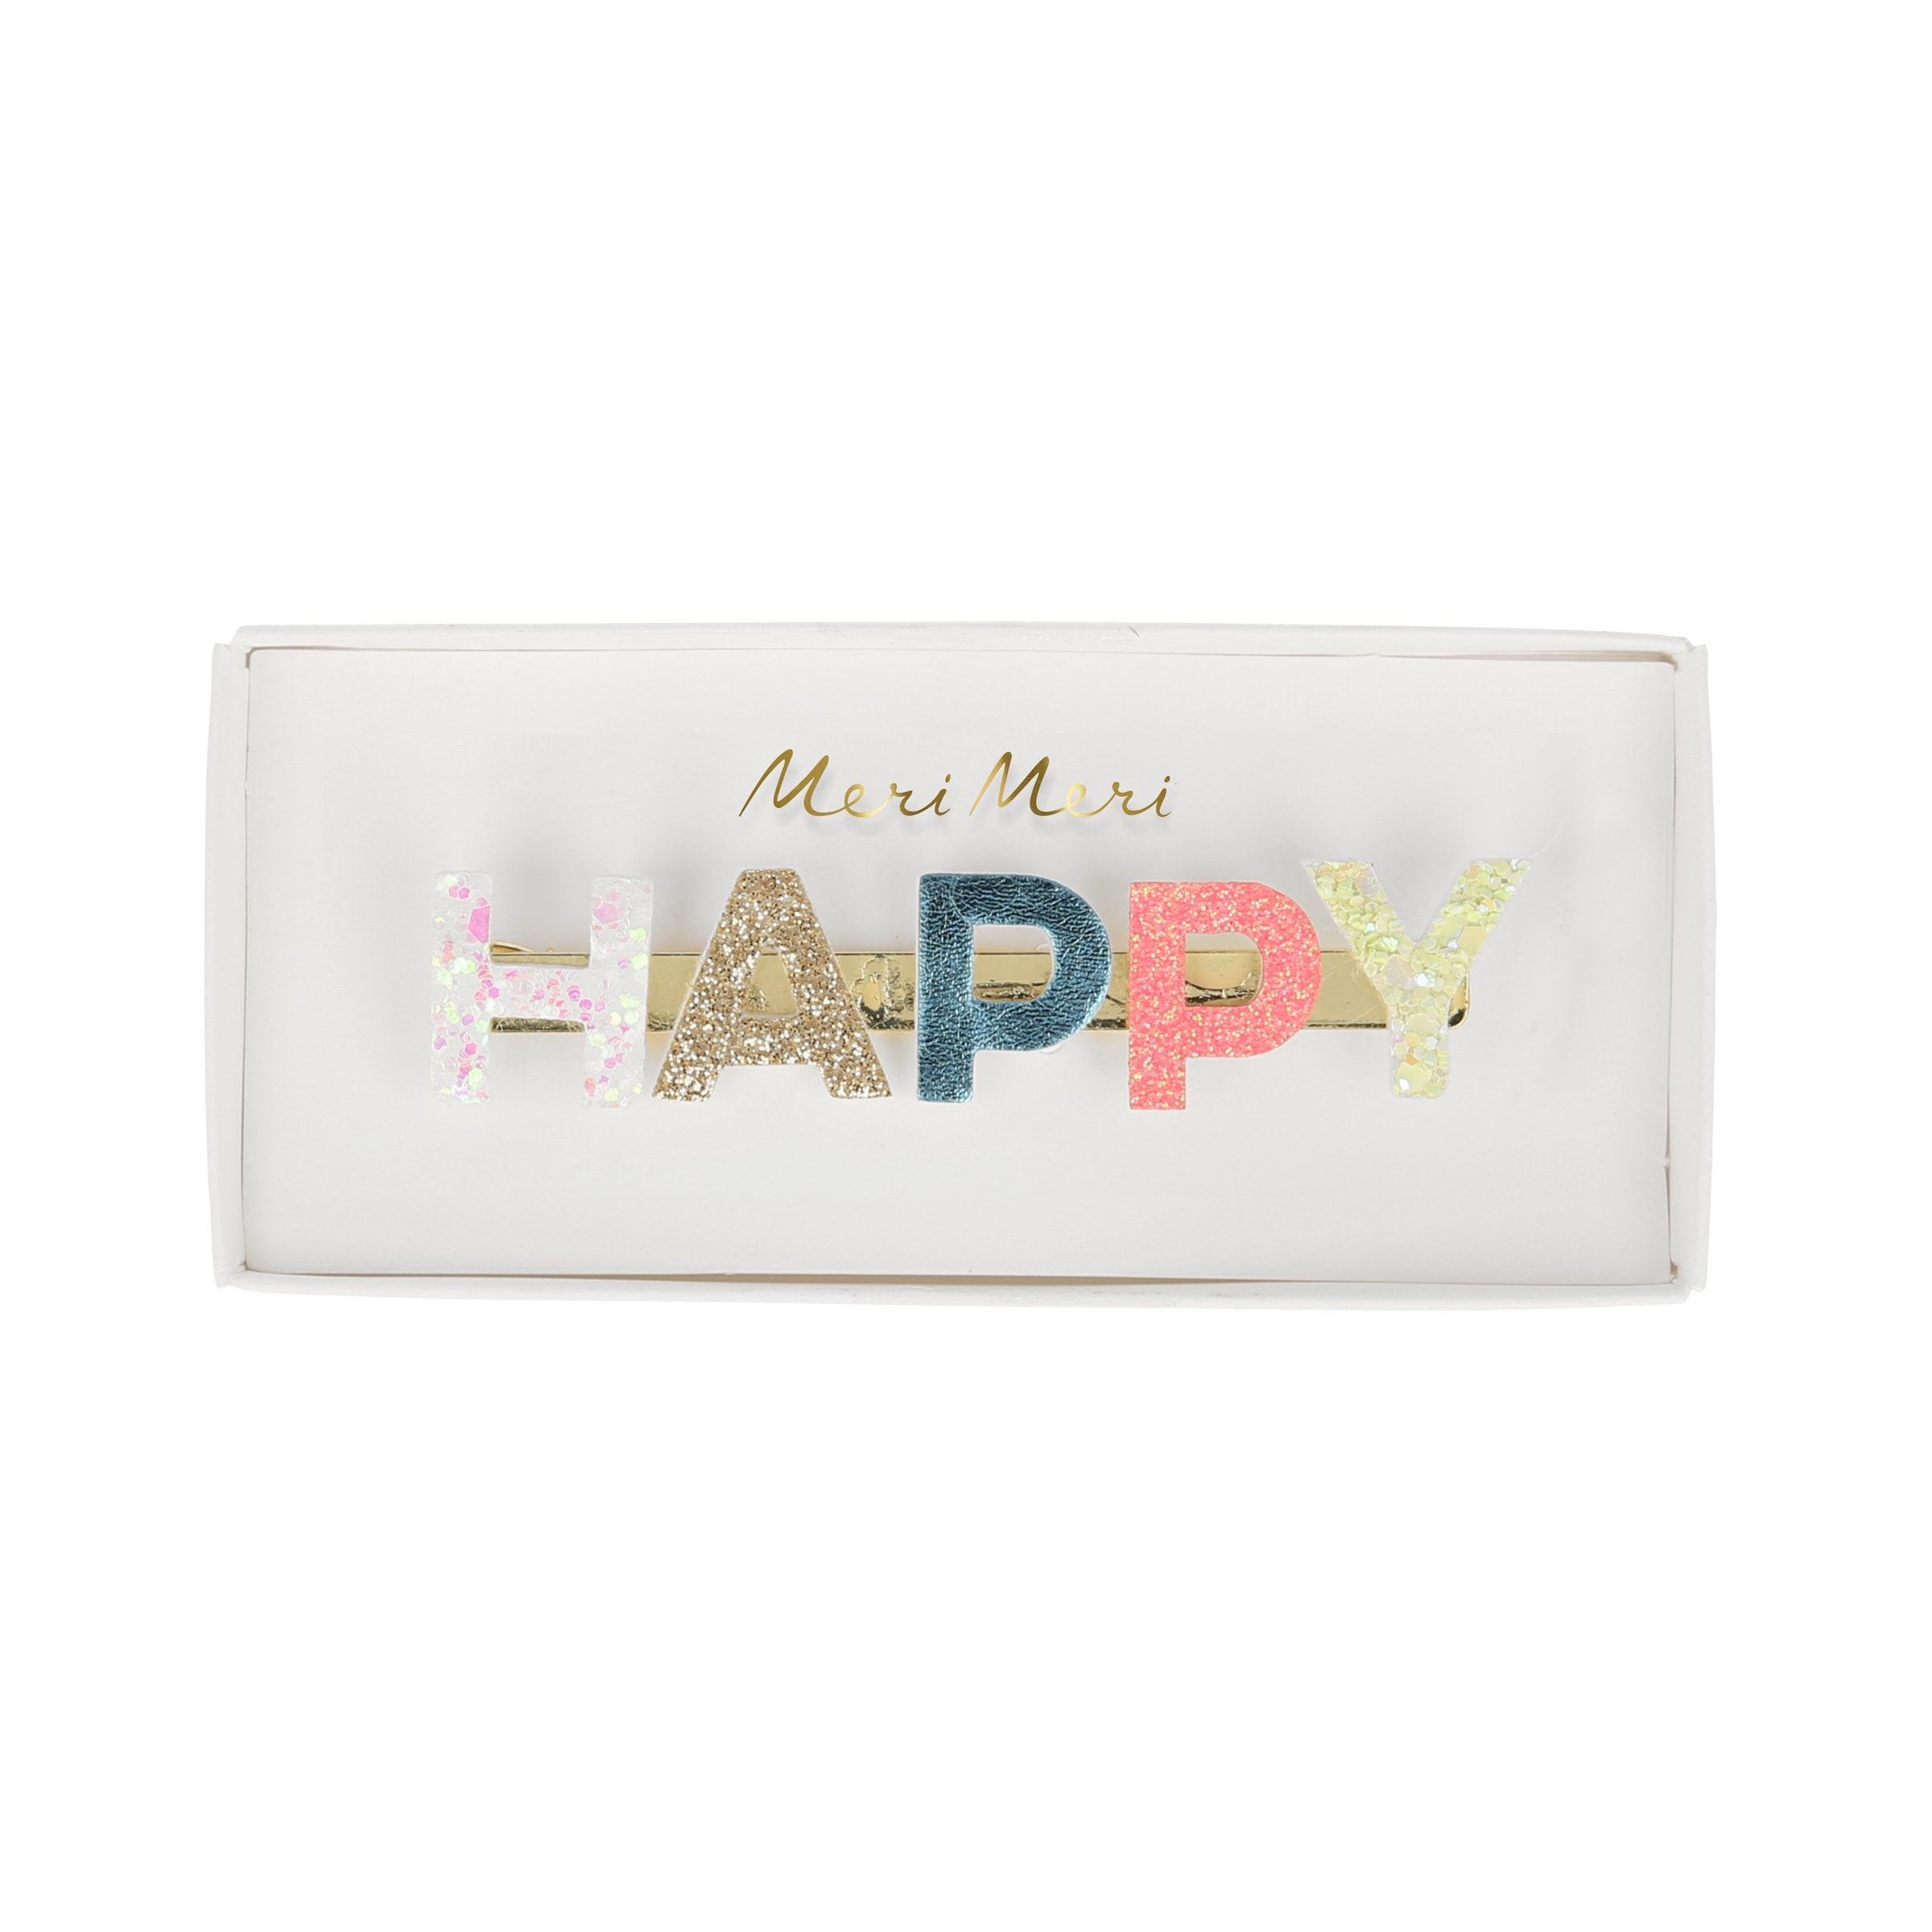 Our gold hair clip features the word "Happy" in leatherette and glitter lettering.